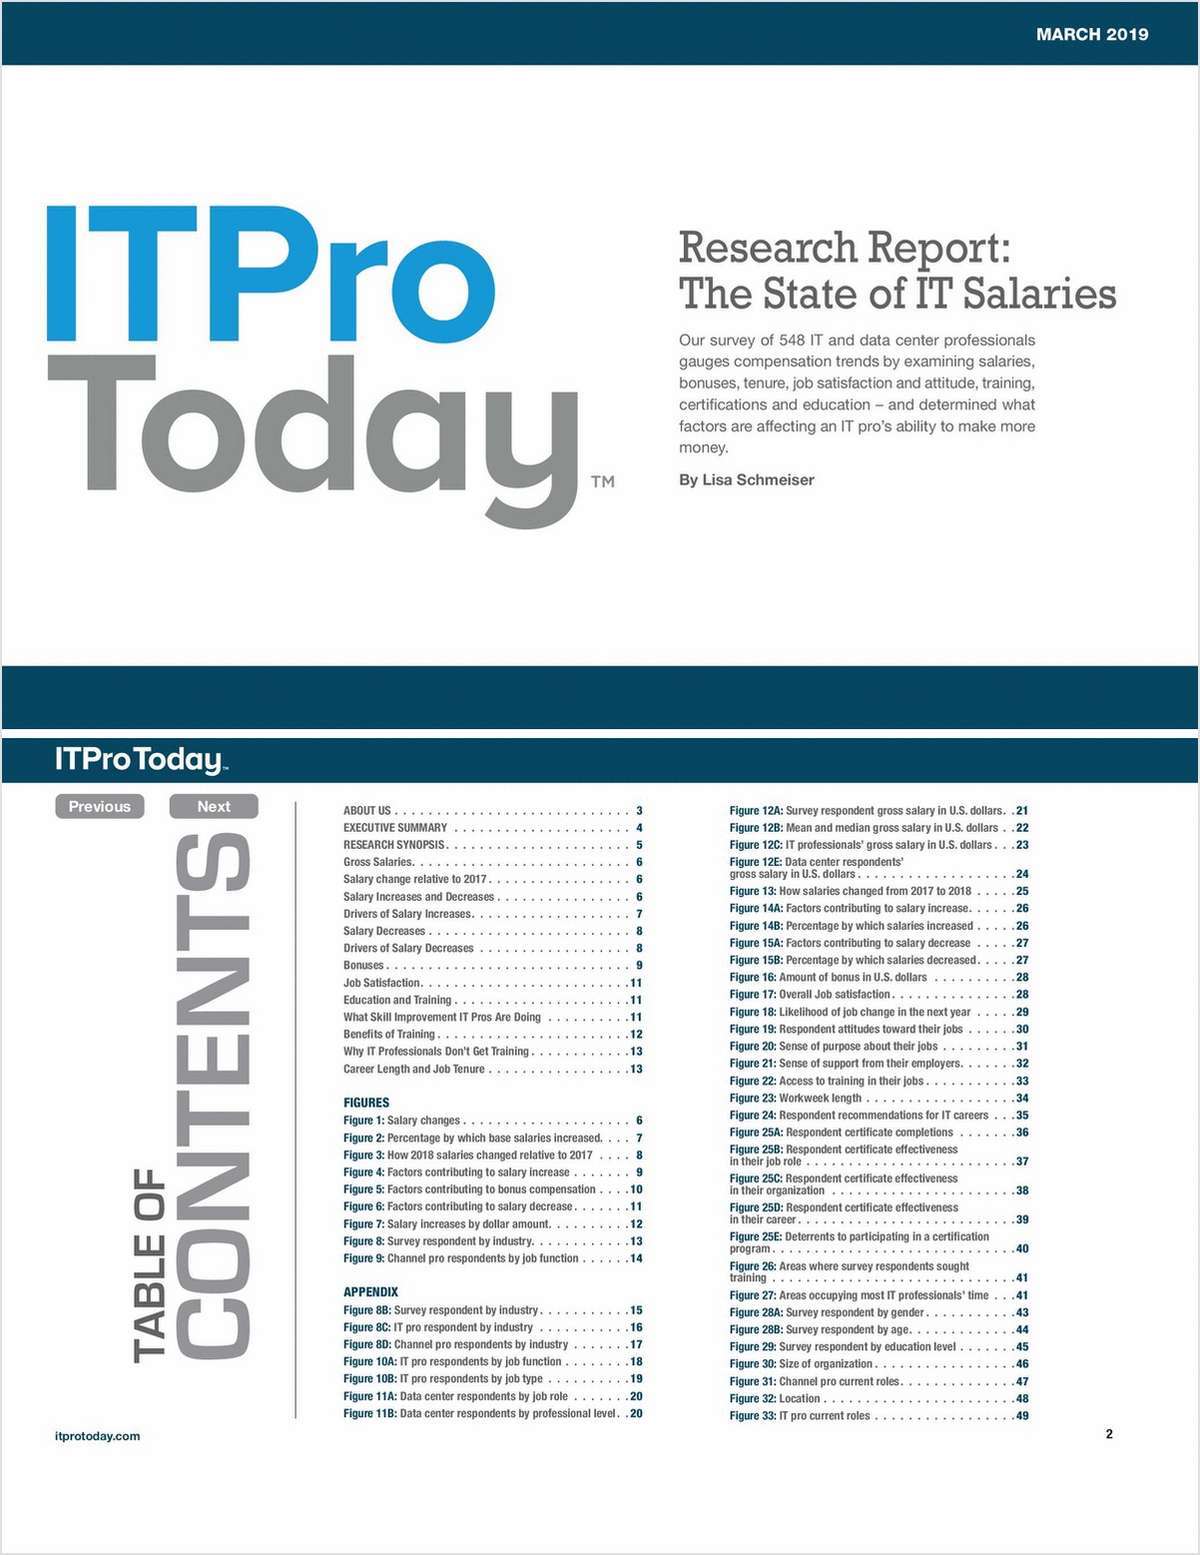 Research Report: The State of IT Salaries